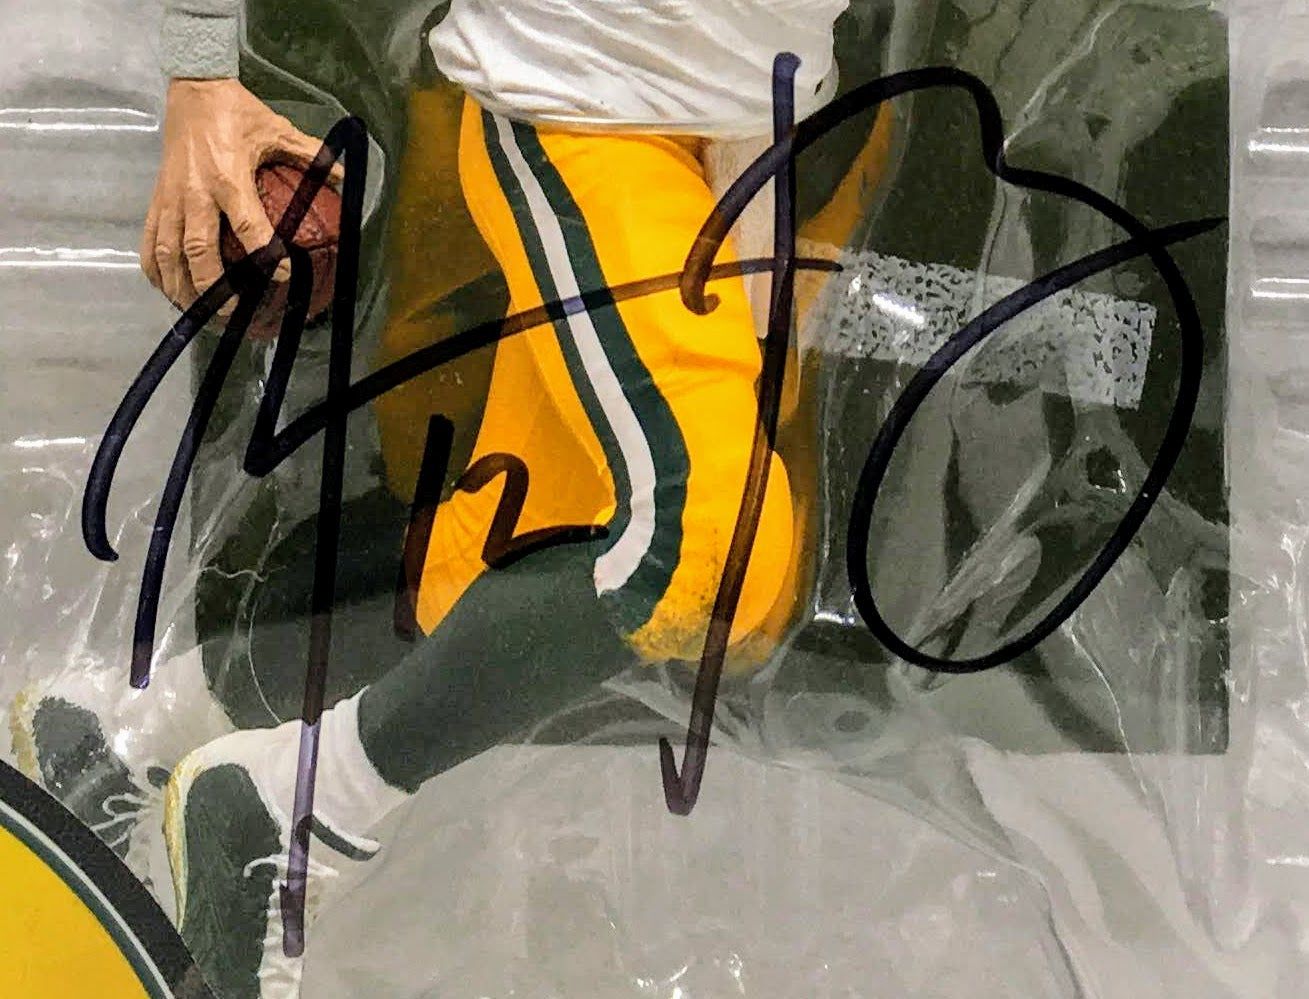 Aaron Rodgers AUTOGRAPHED